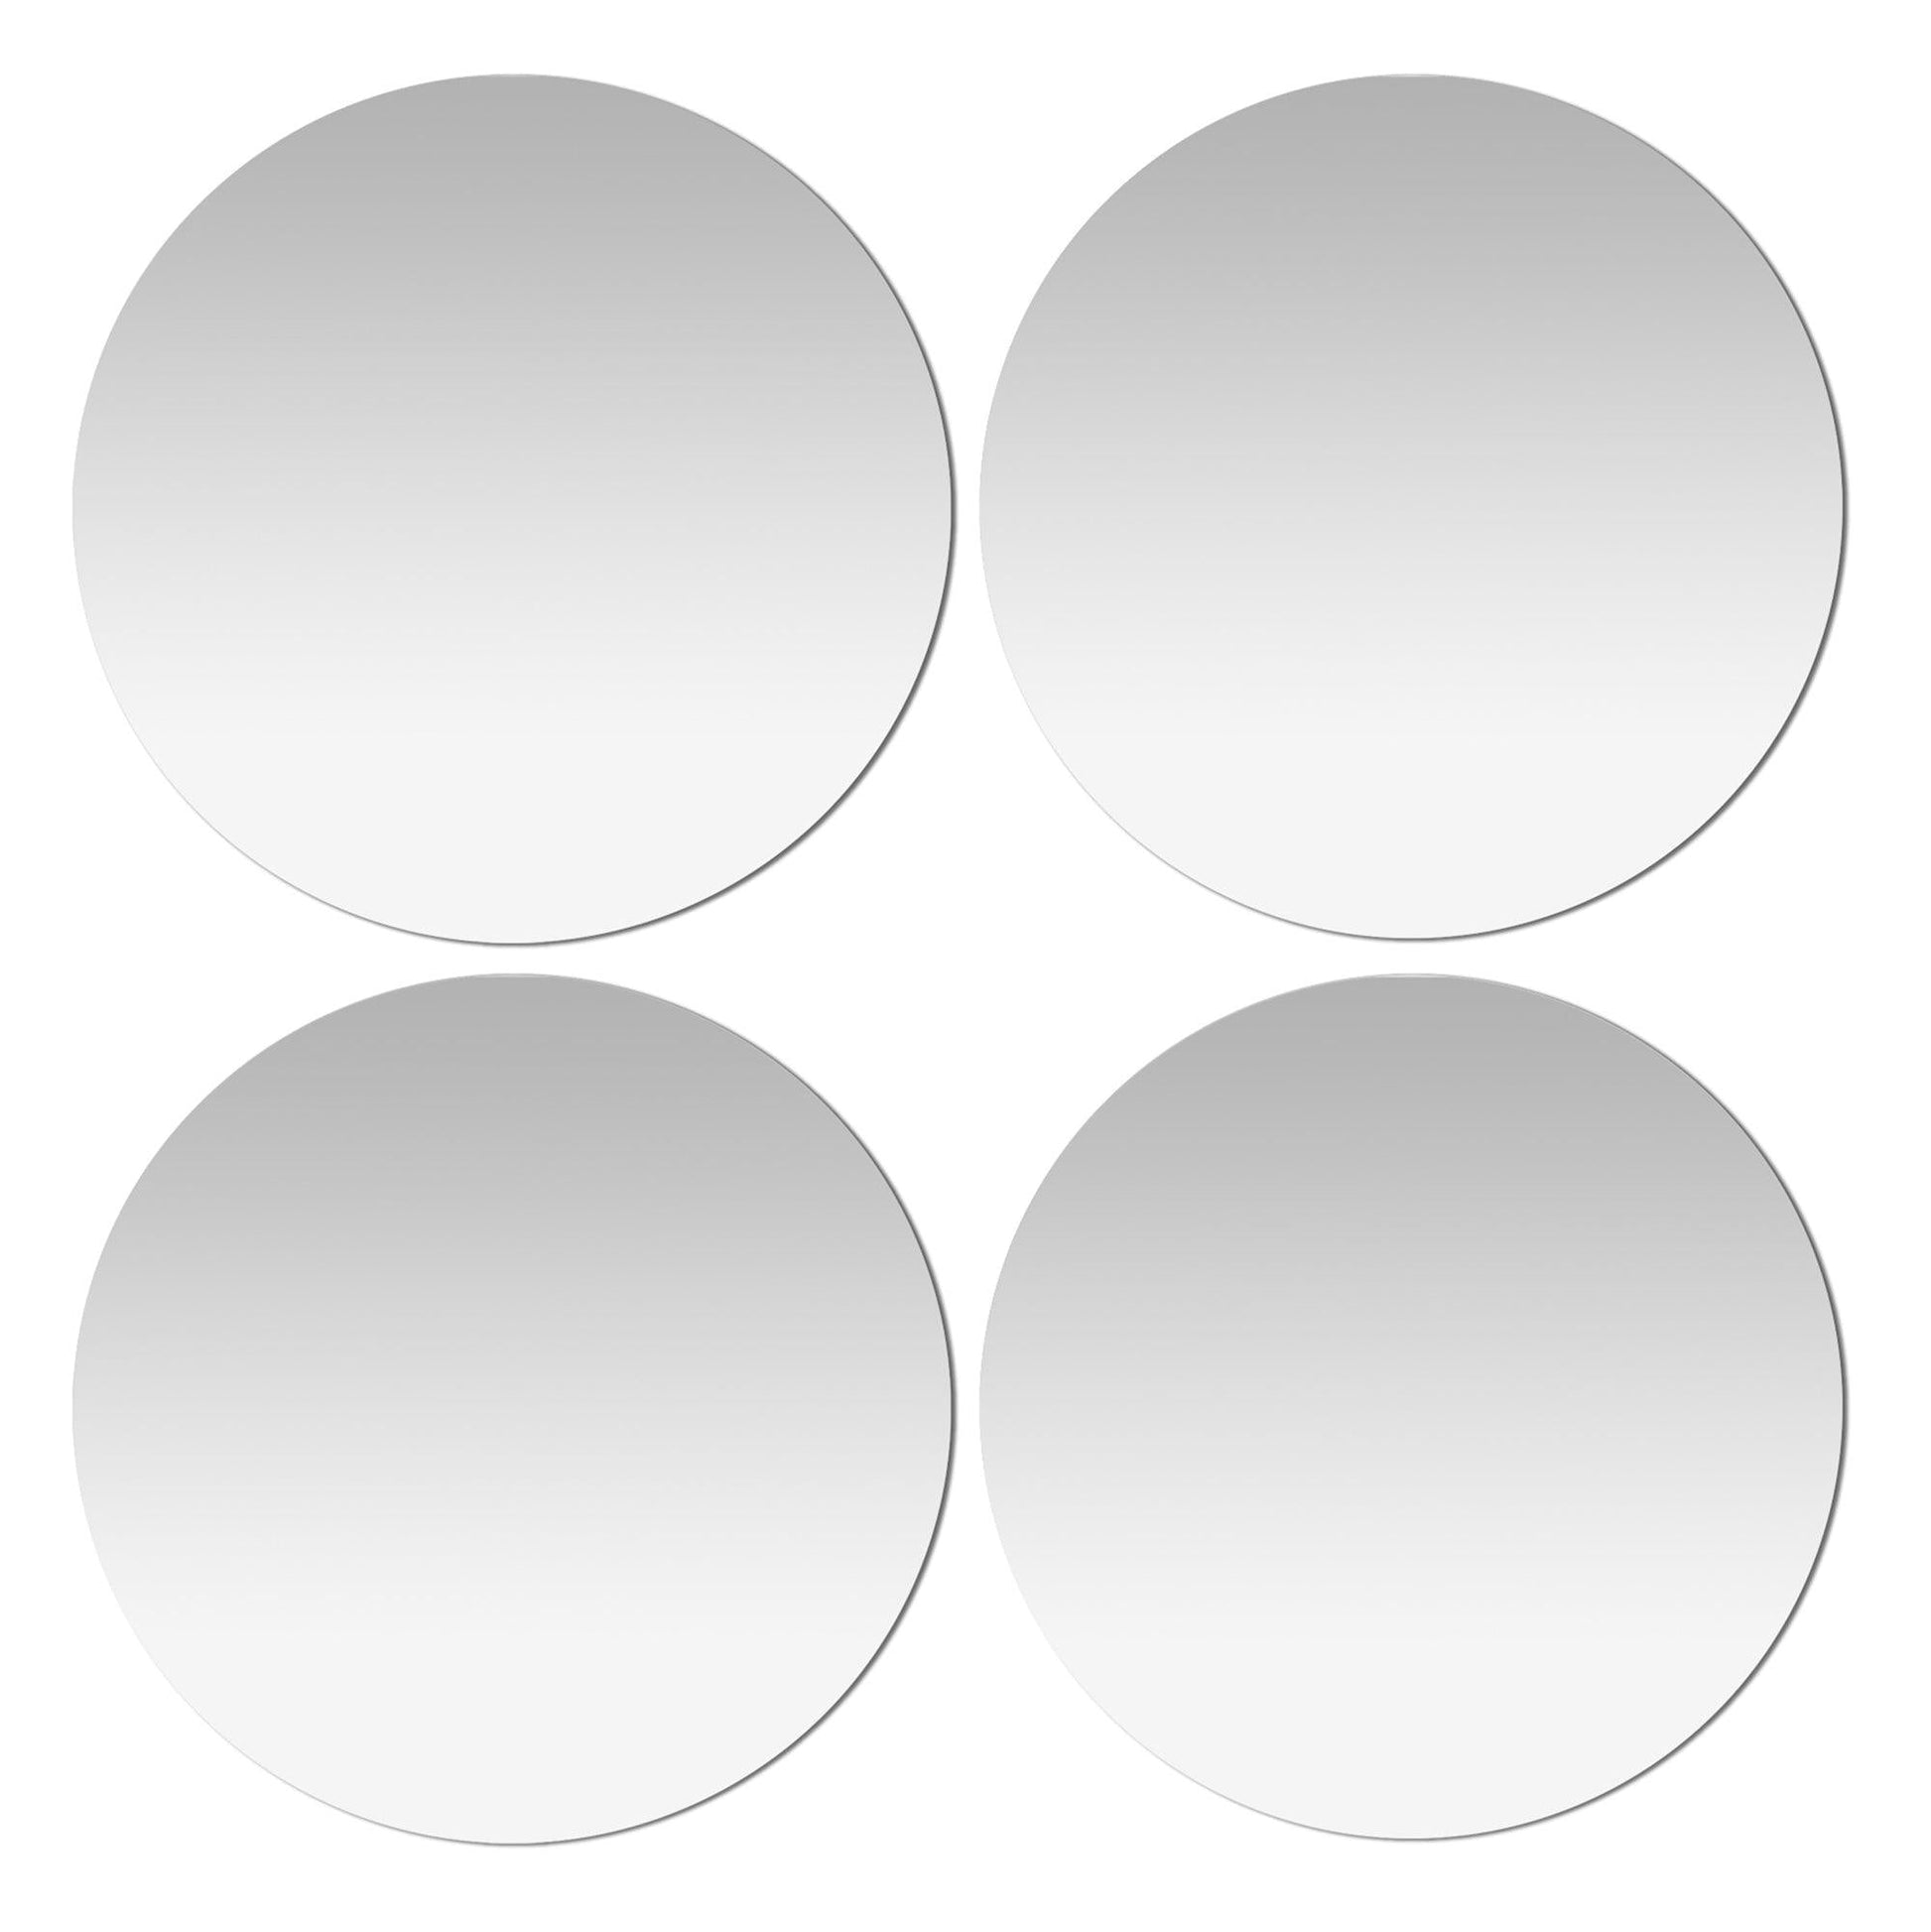 Americanflat Adhesive Mirror Tiles - Circular Domino Dot Design - Peel and  Stick Mirrors for Wall. Frameless Round Mirrors for Bedroom and Living Room